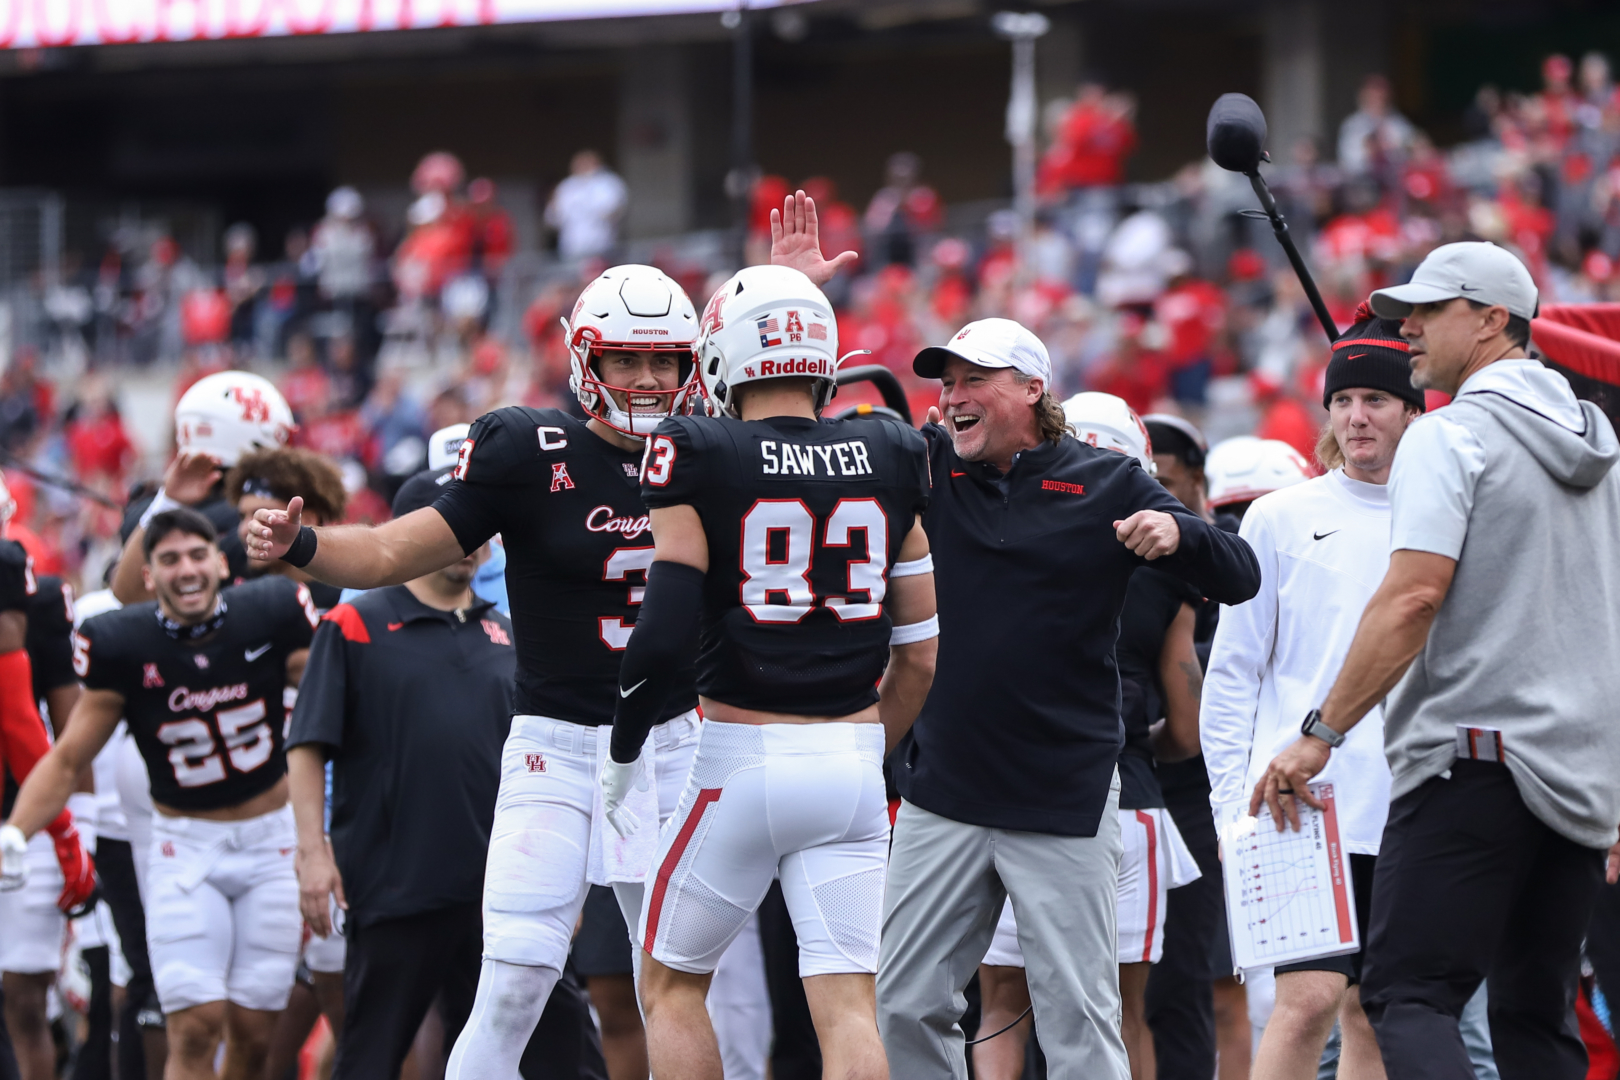 UH football has strung together three straight wins, keeping its hopes of an AAC title alive. | Sean Thomas/The Cougar